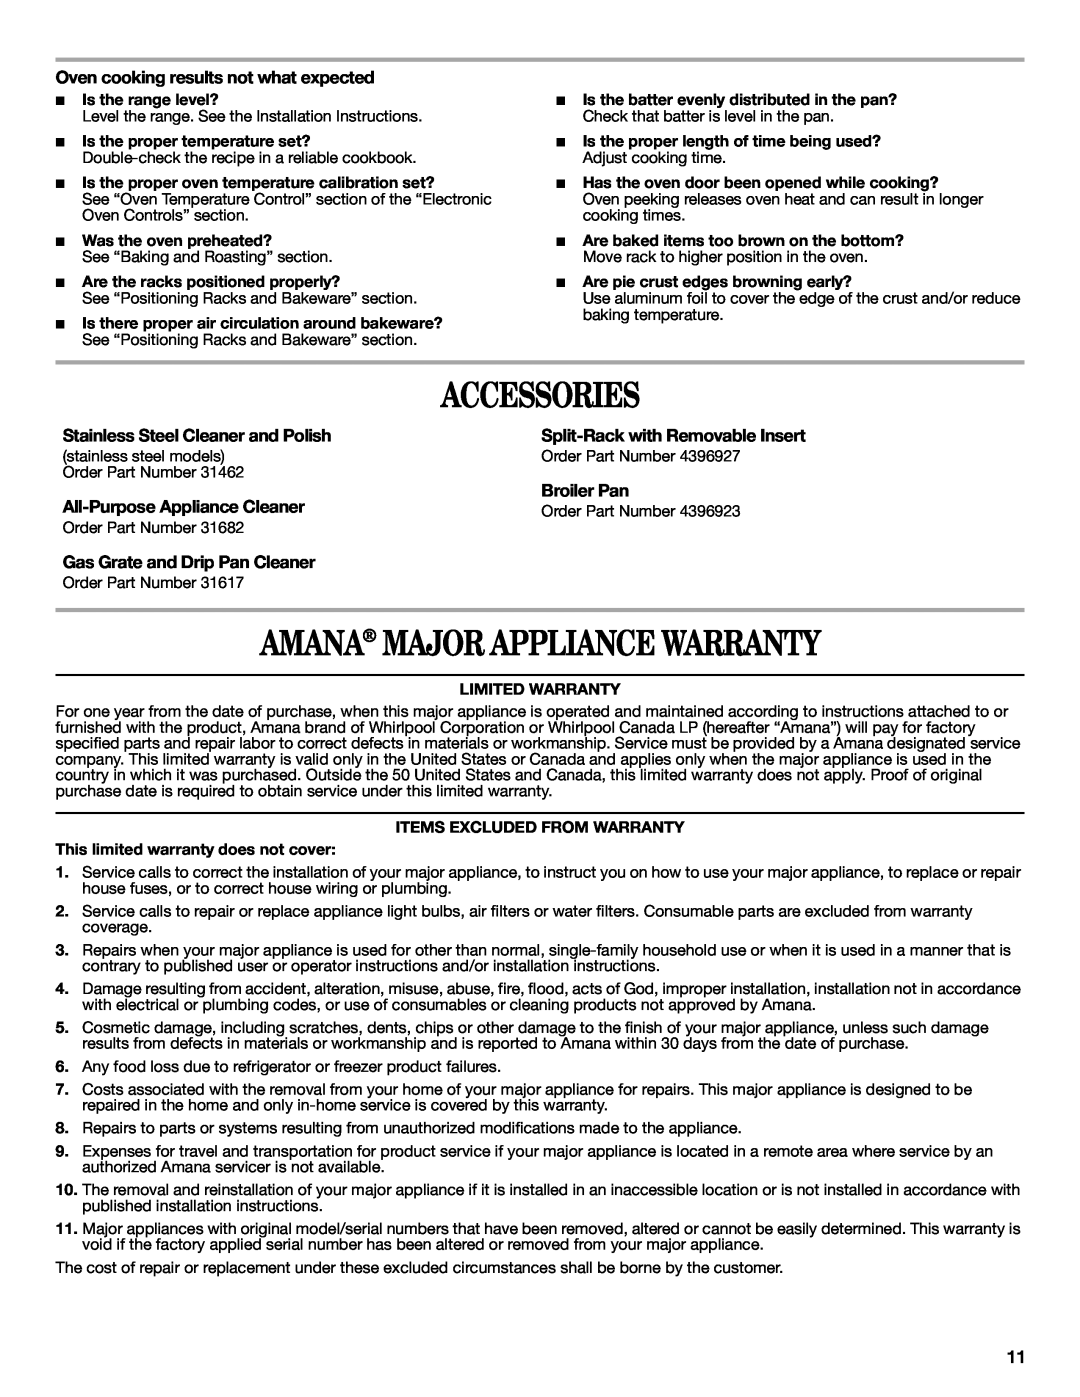 Amana AGR6011VDW warranty Accessories, Amana Major Appliance Warranty, Oven cooking results not what expected, Broiler Pan 